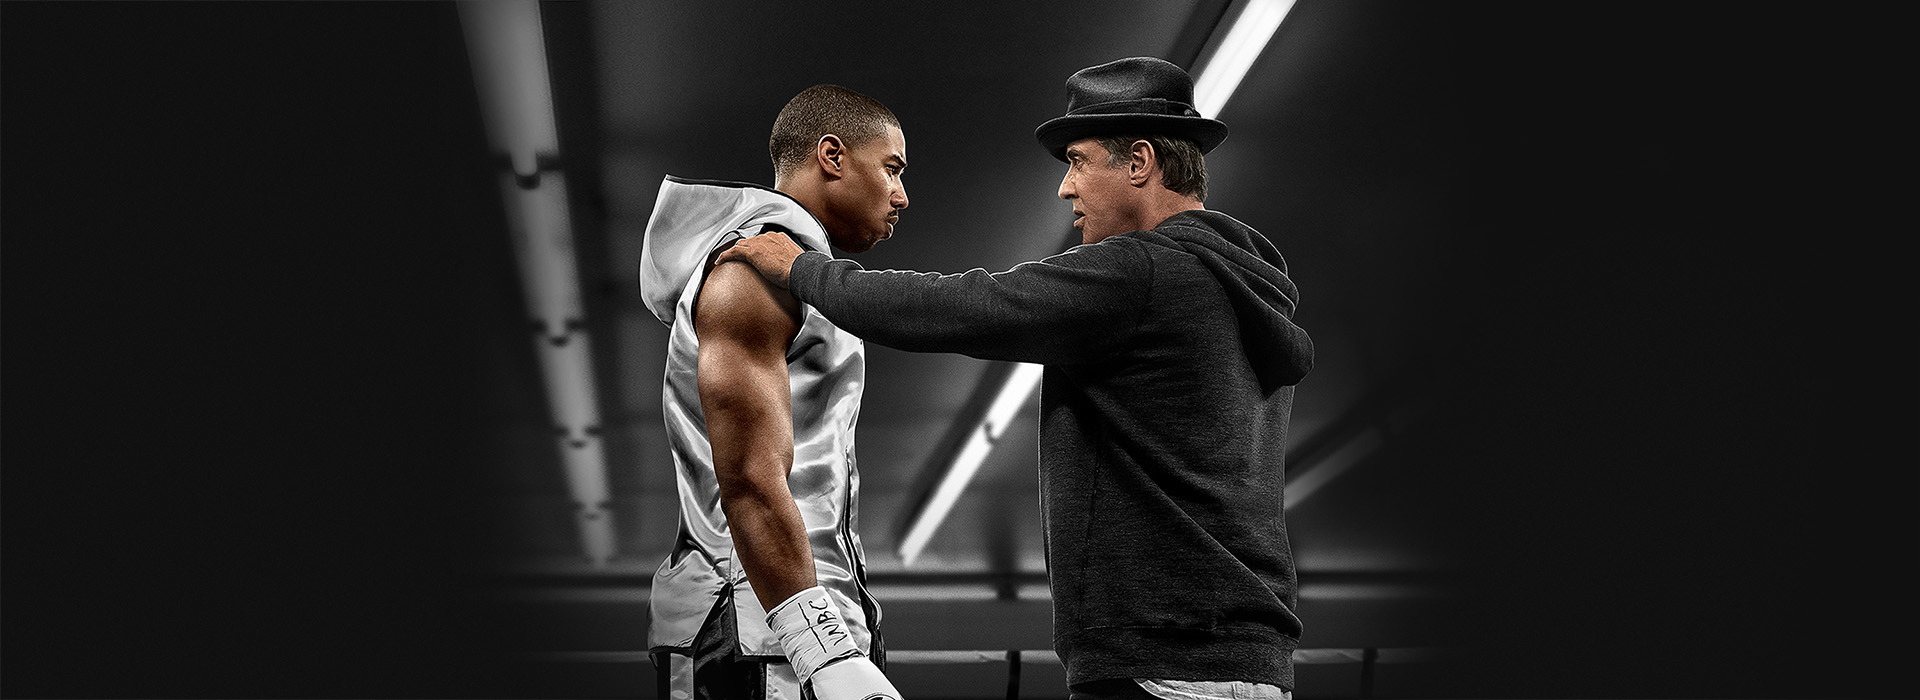 Movie poster Creed